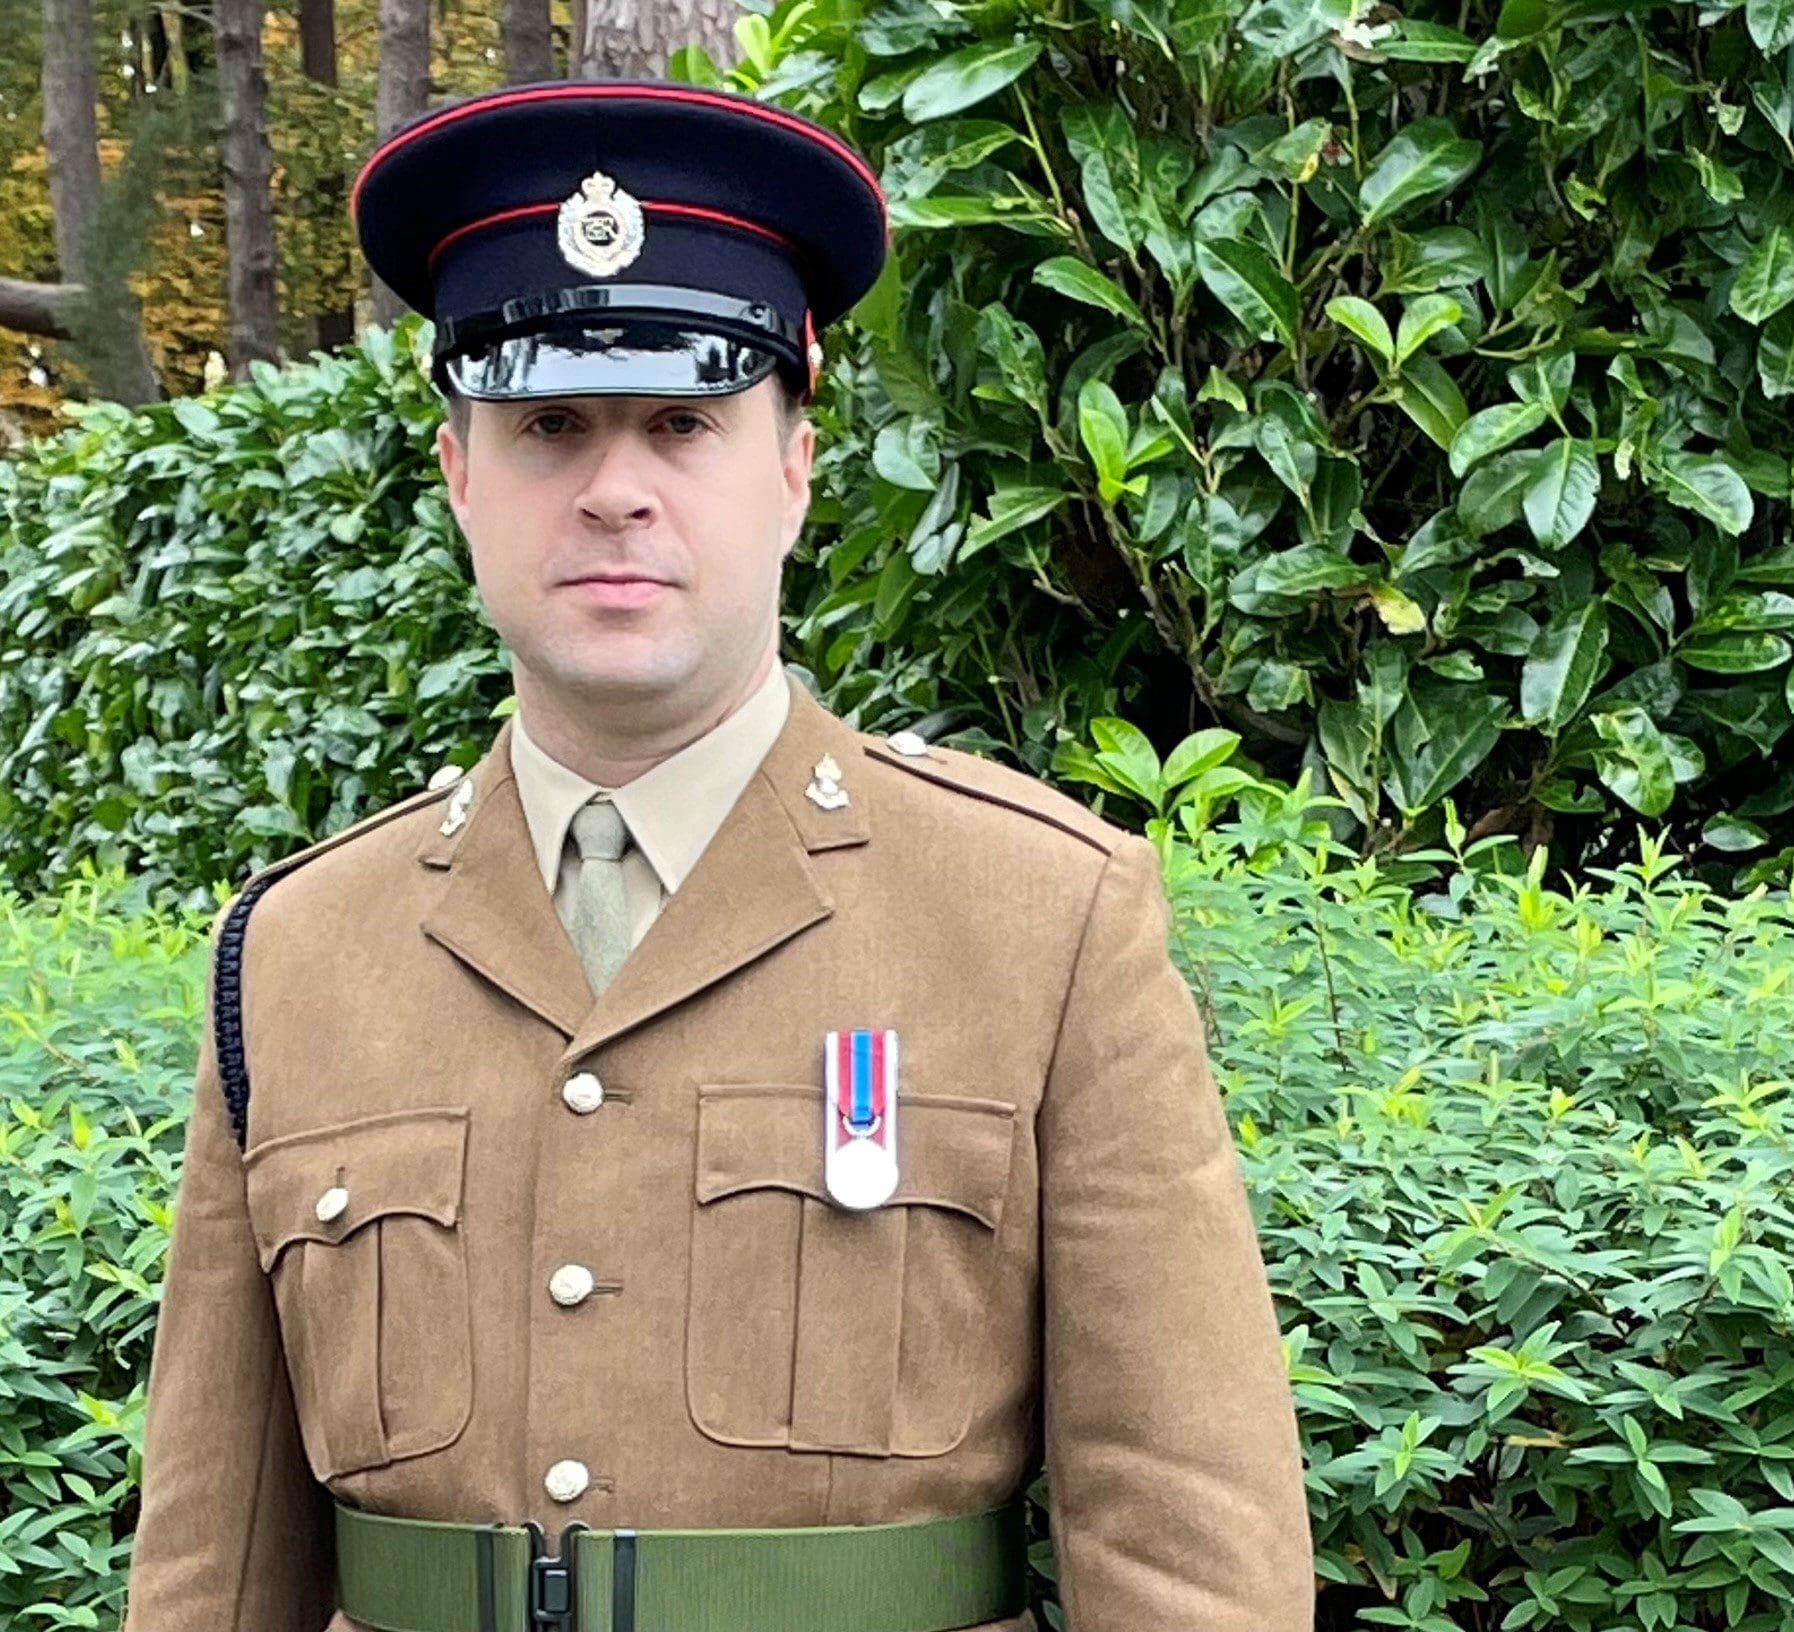 Ryan Westwood Ophthalmic Field Service Engineer and Sapper in the Corps of Royal Engineers